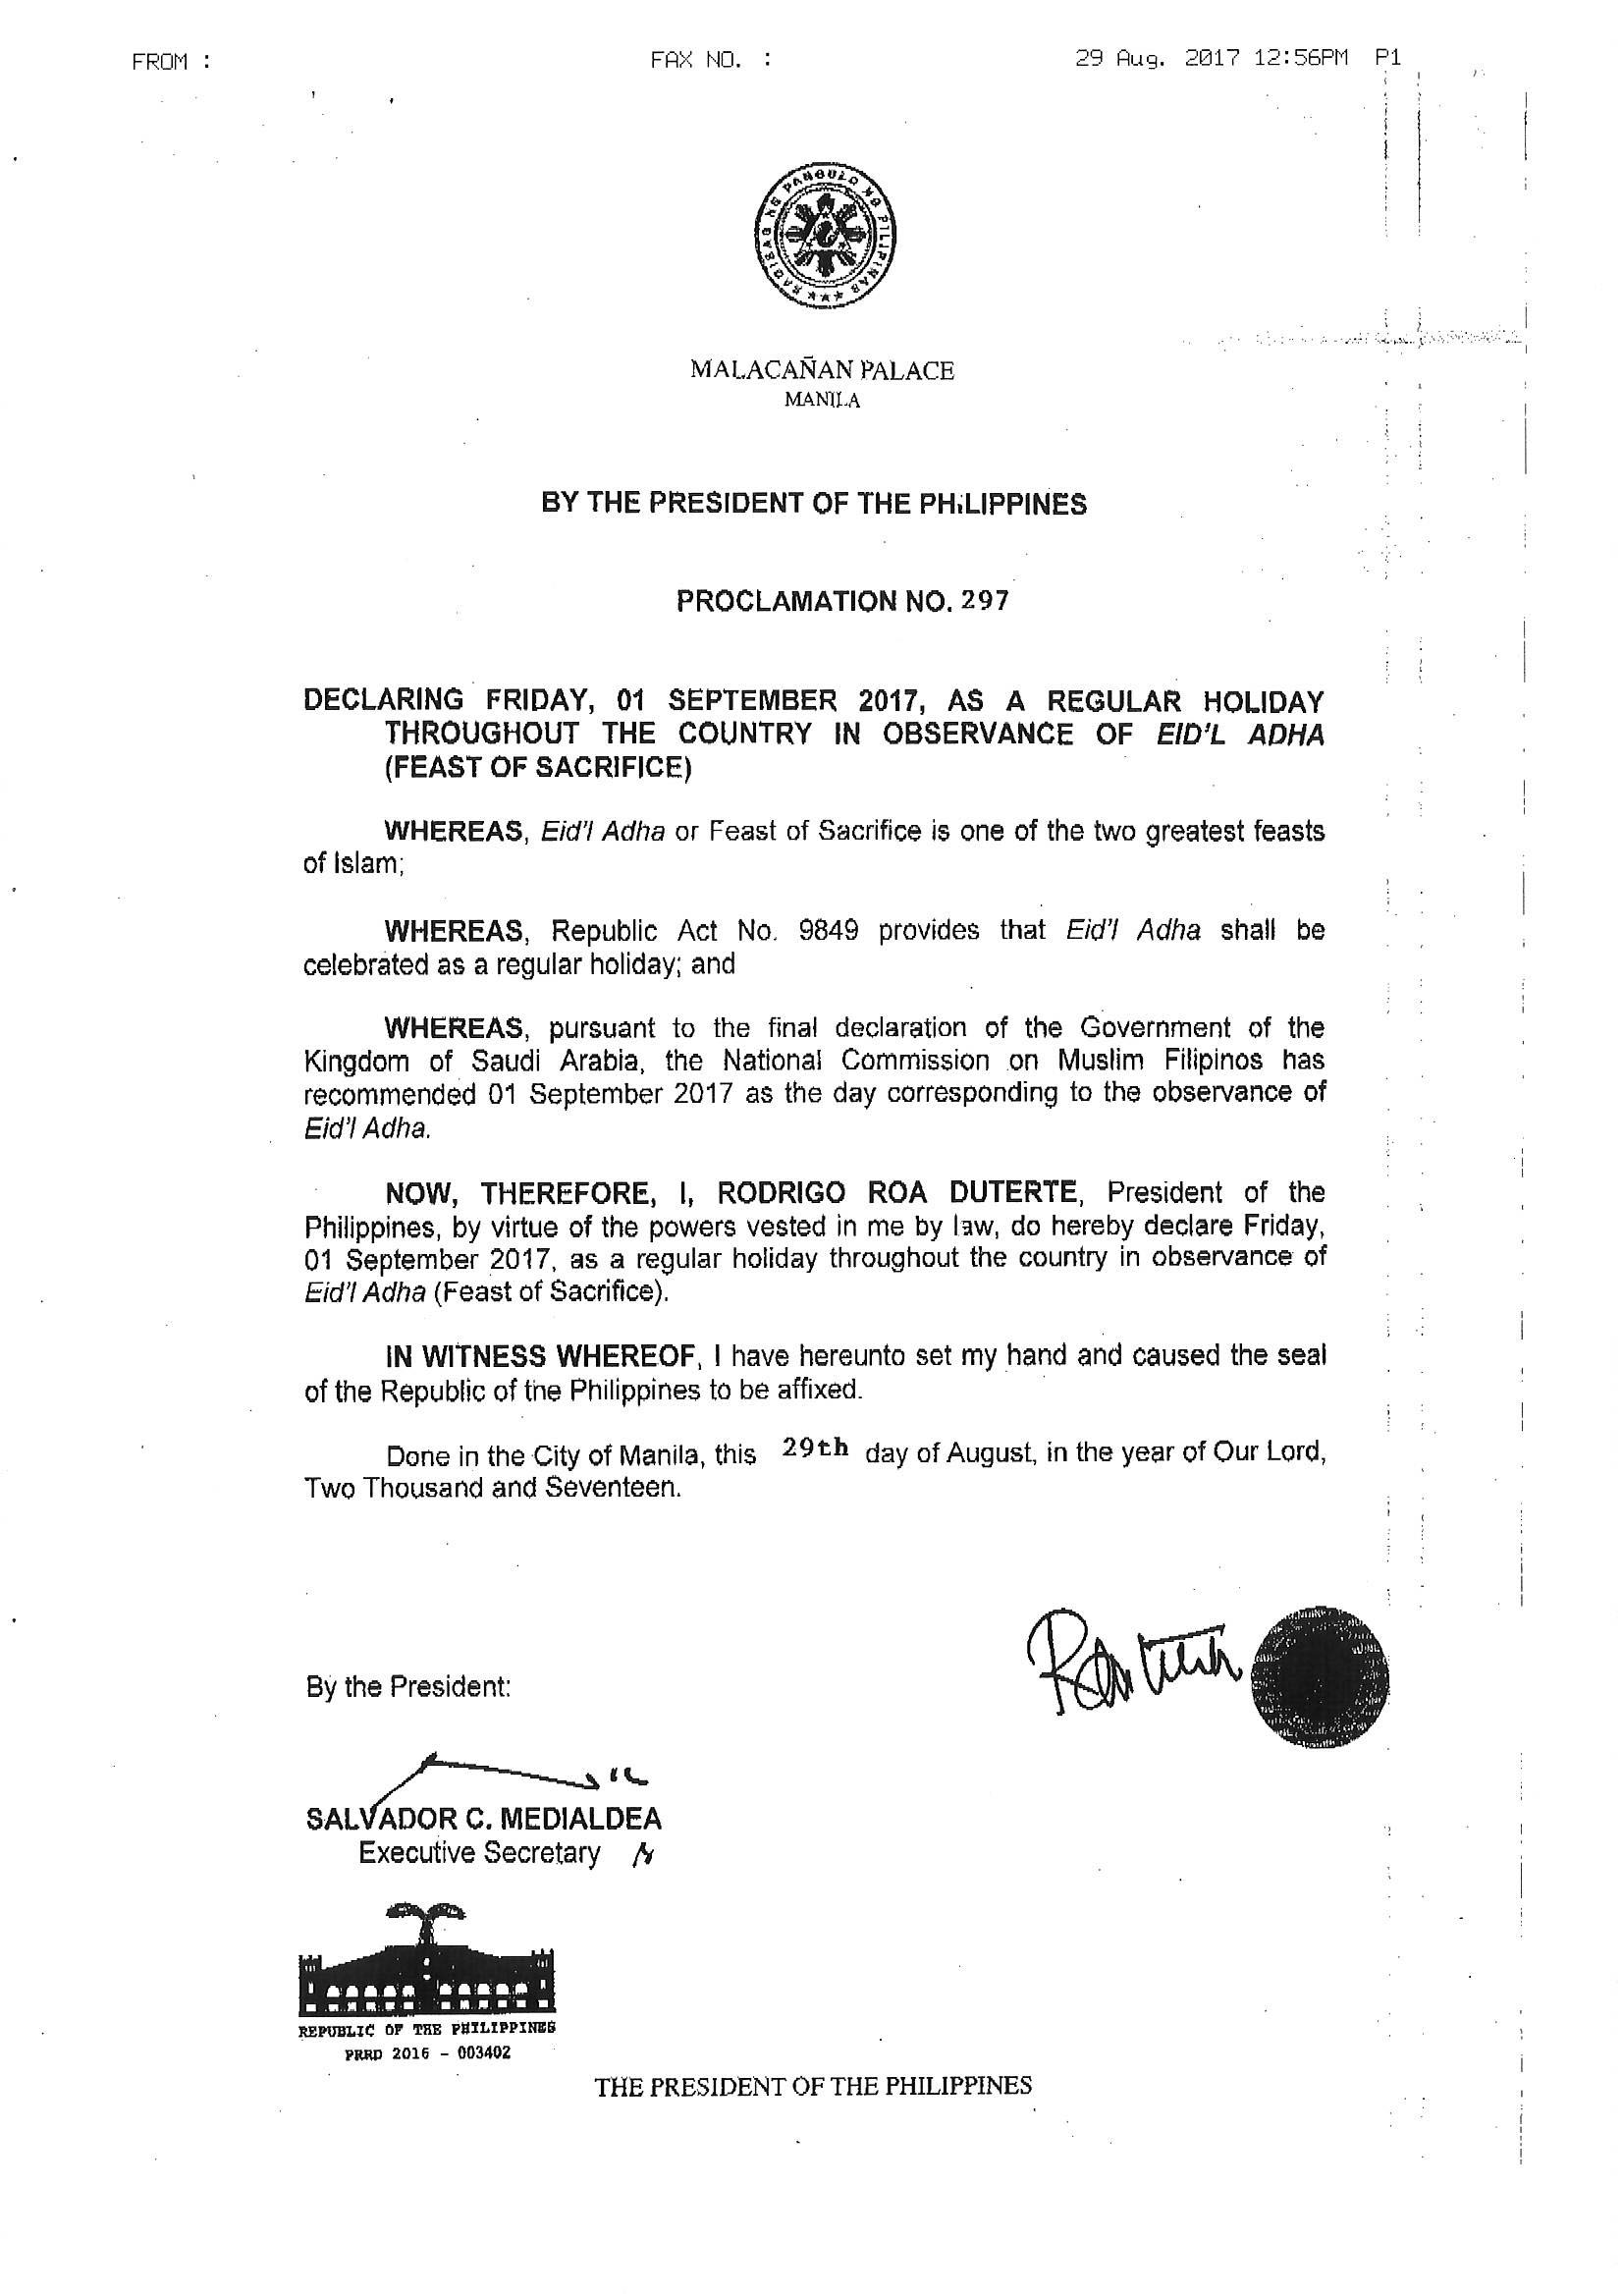 It’s official Palace declares Sept. 1 a regular holiday for Eid’l Adha